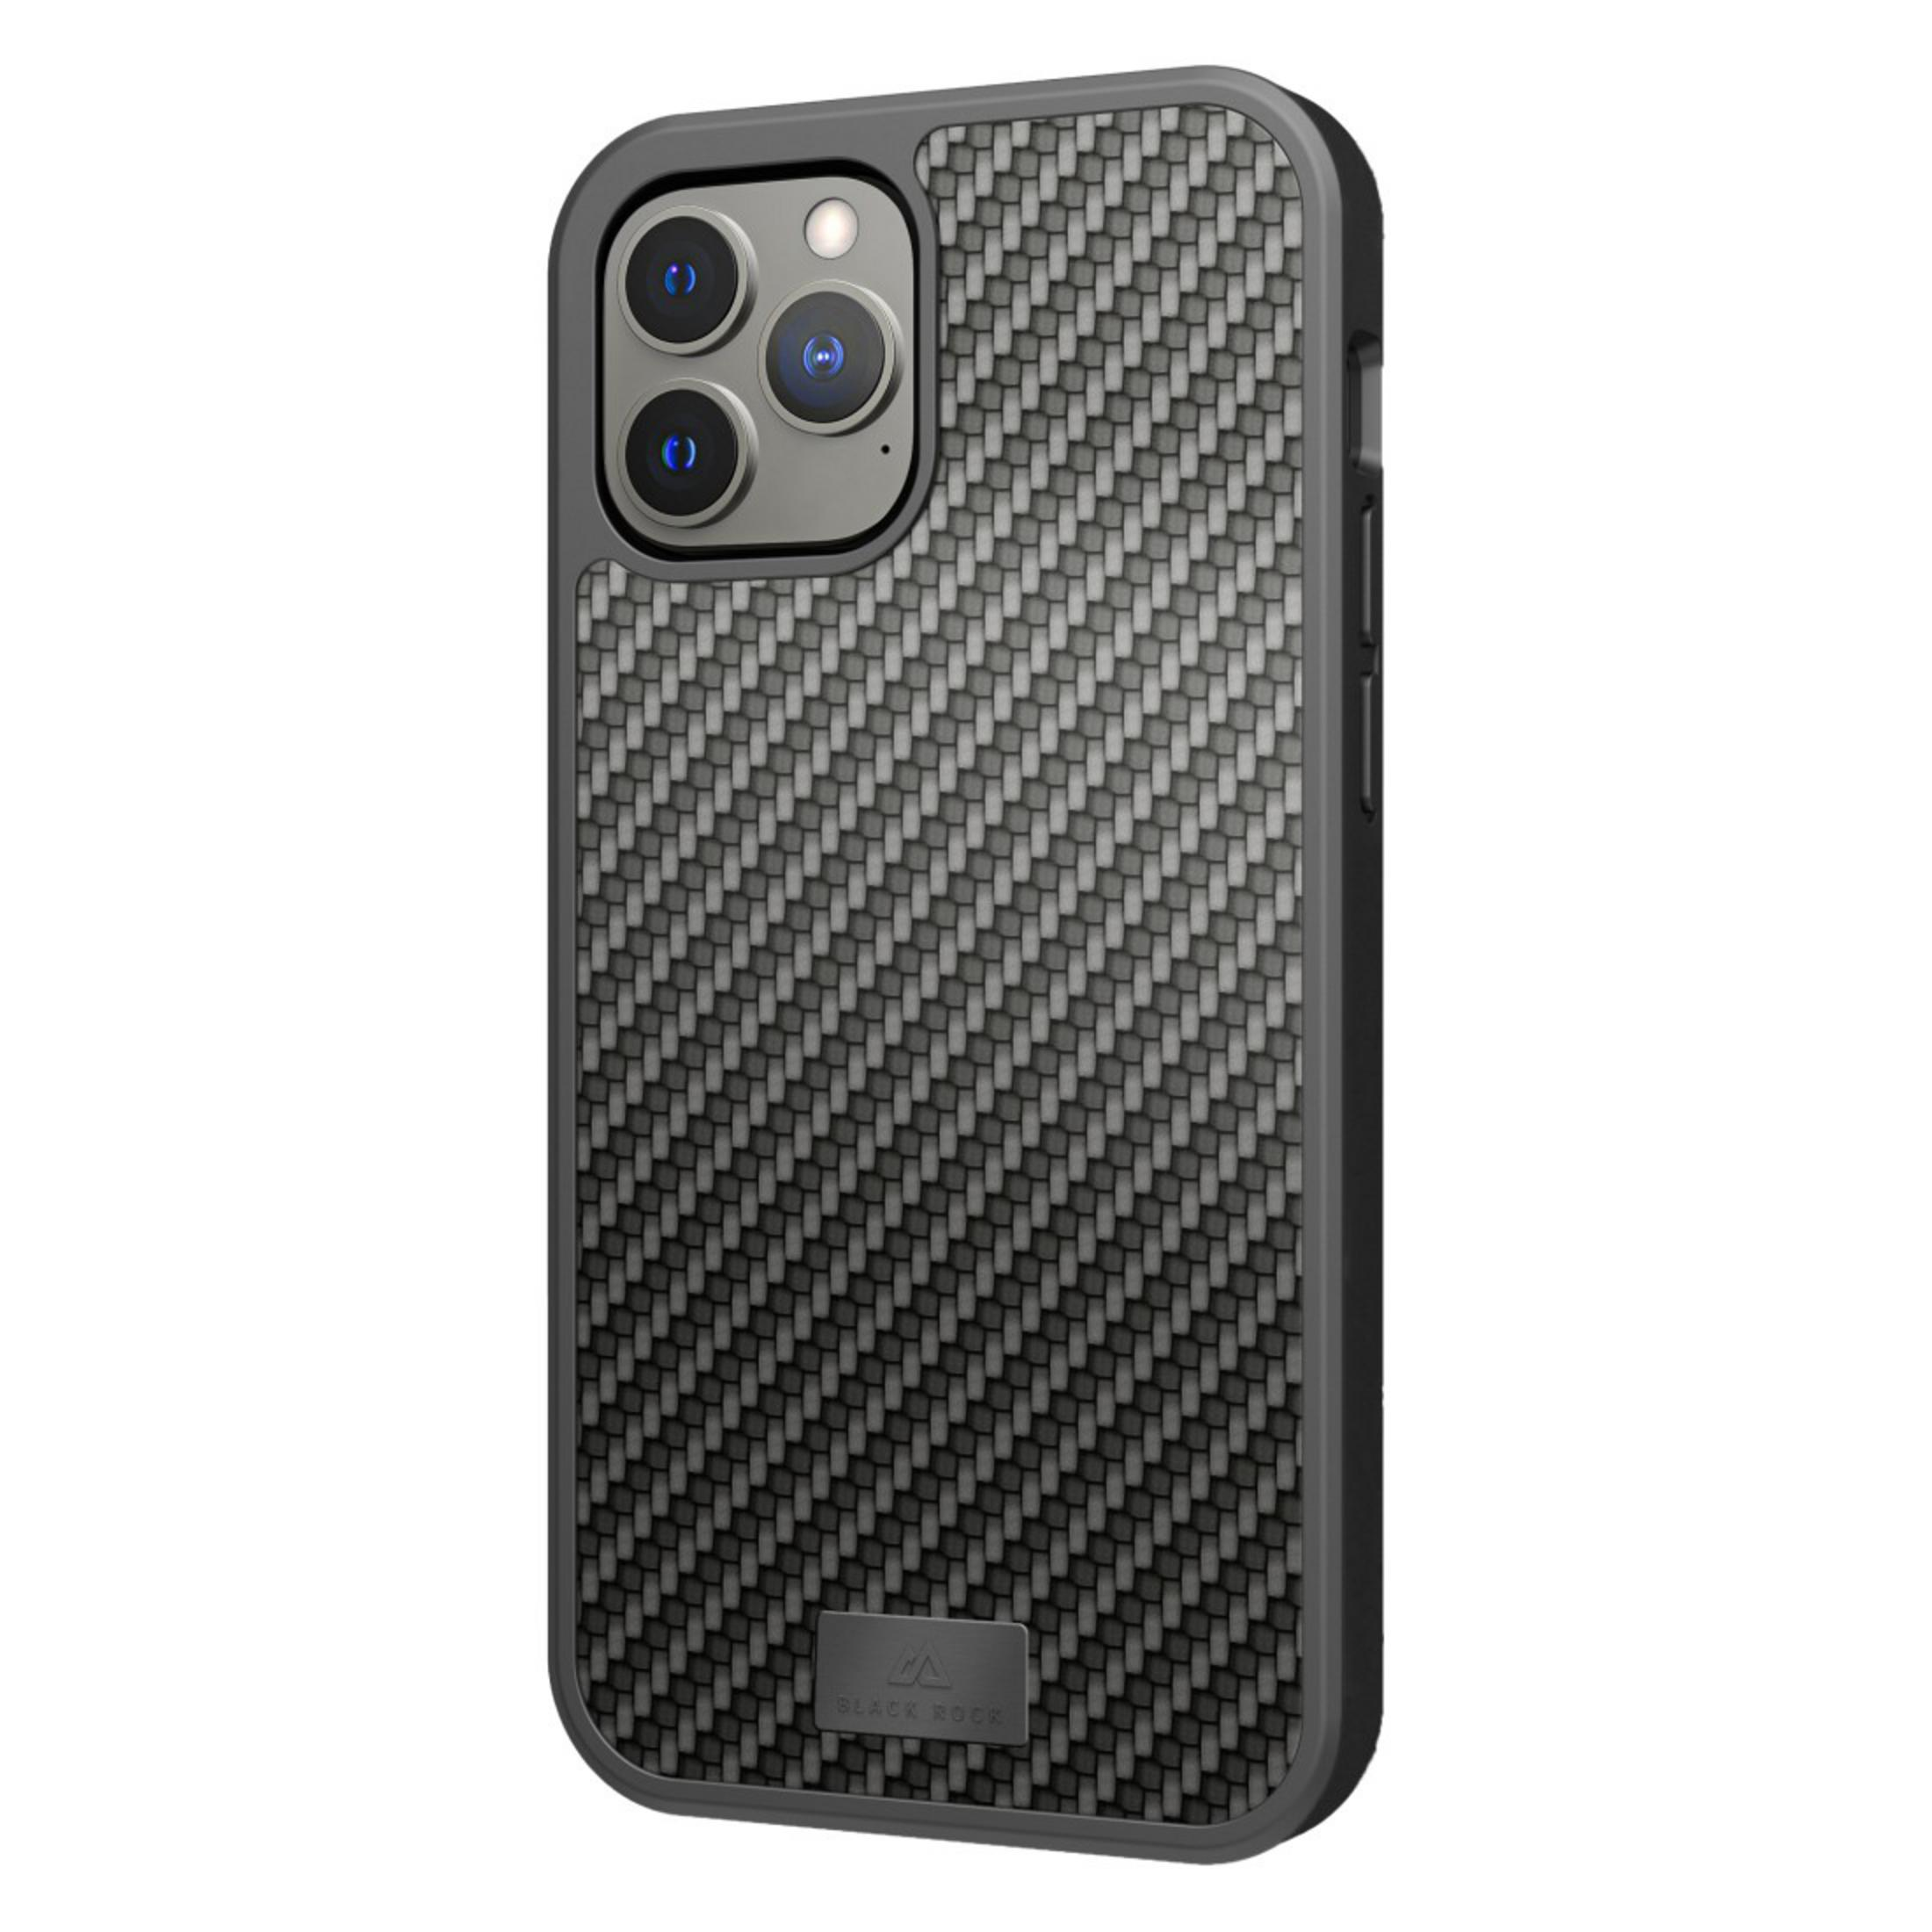 PROTECTIVE Backcover, 13 Apple, MAX ROCK Schwarz IPH13 CARBON BLACK Pro iPhone 217046 Max, C. SW, REAL PRO